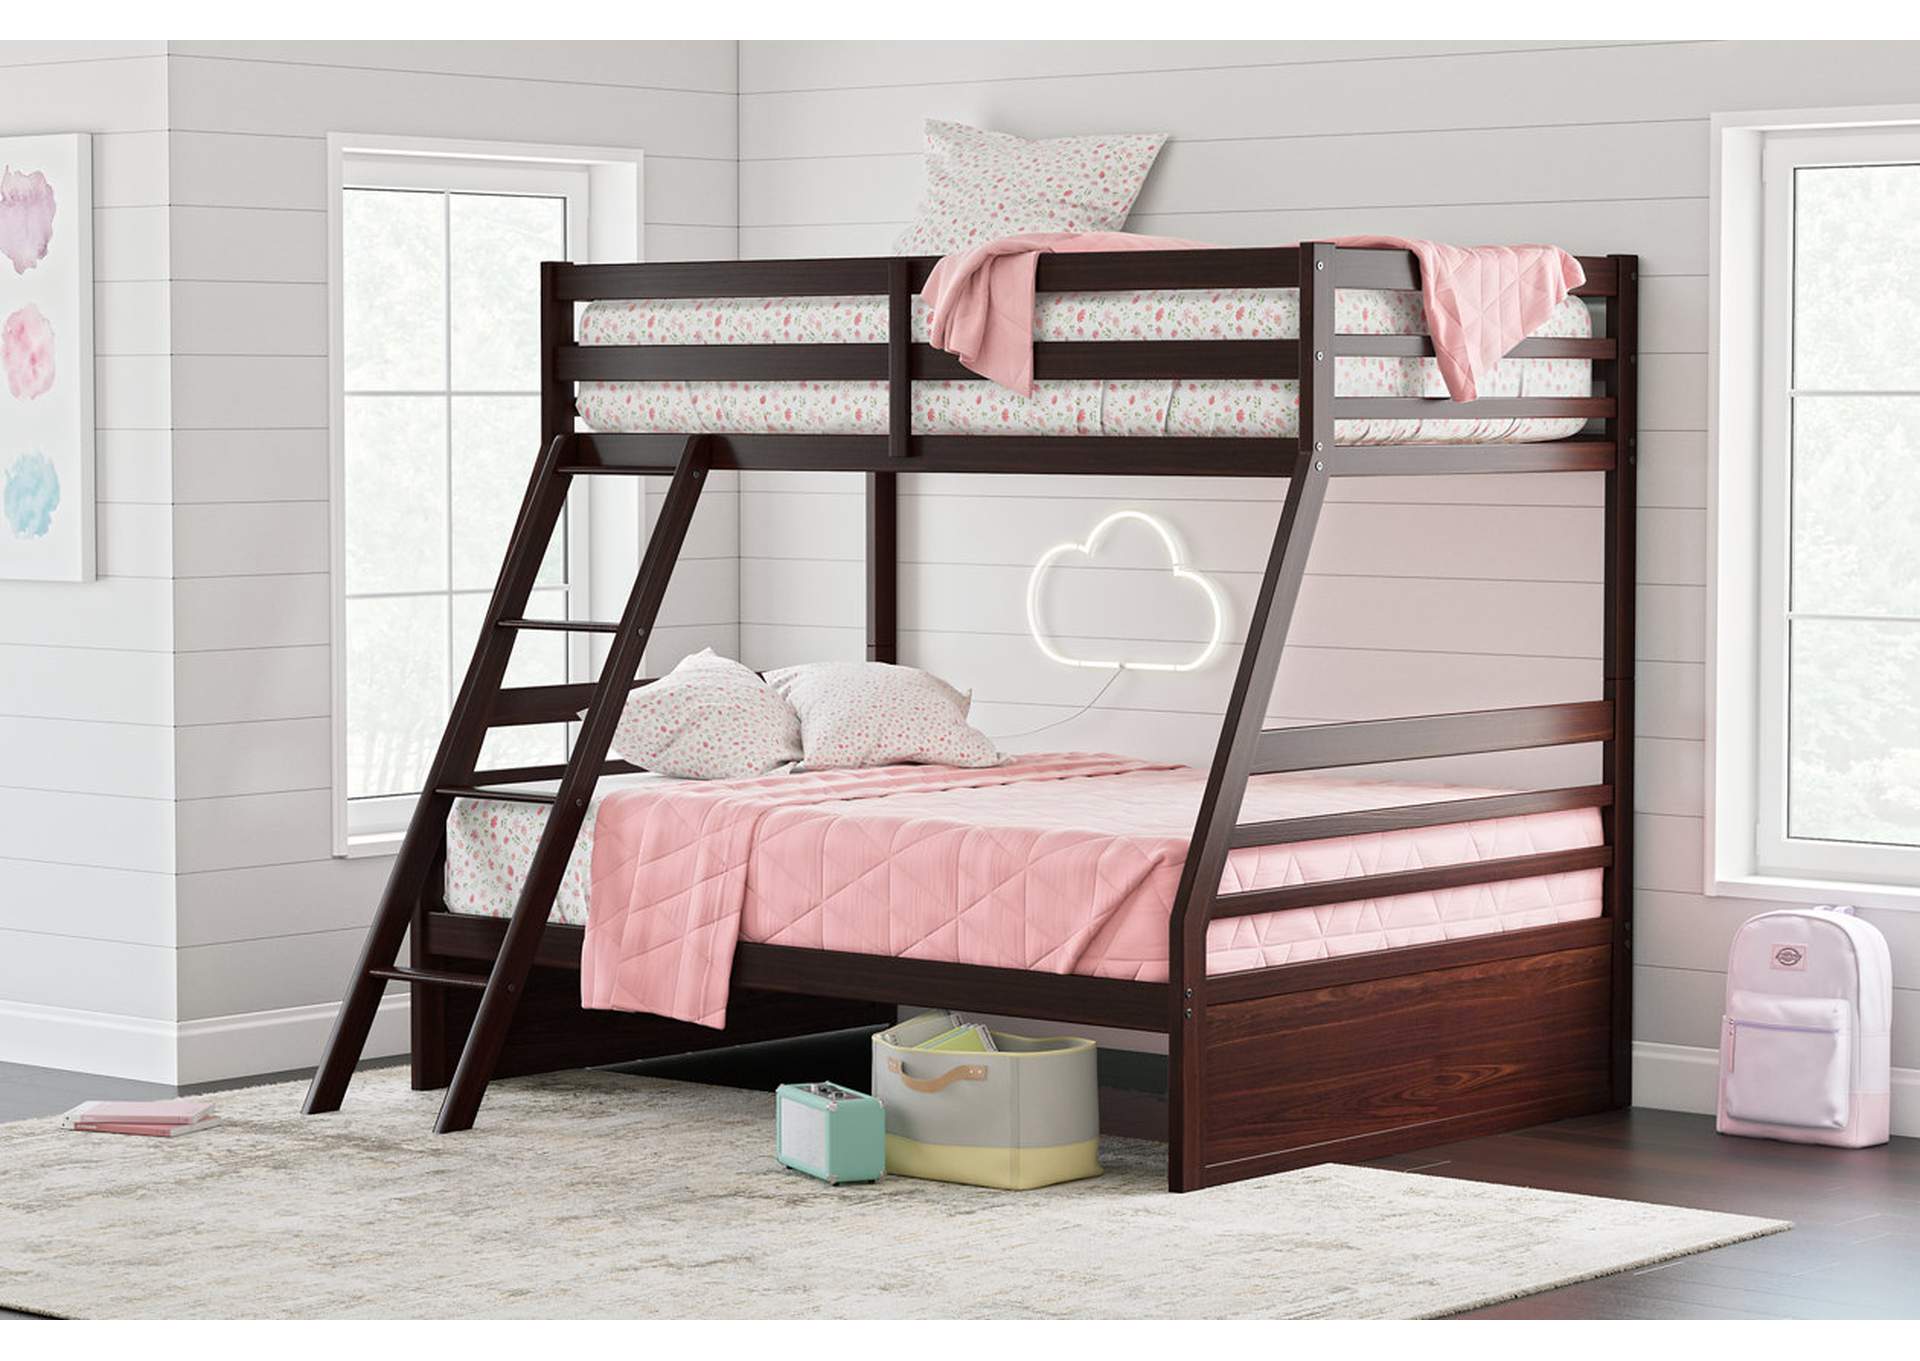 Halanton Twin over Full Bunk Bed,Signature Design By Ashley